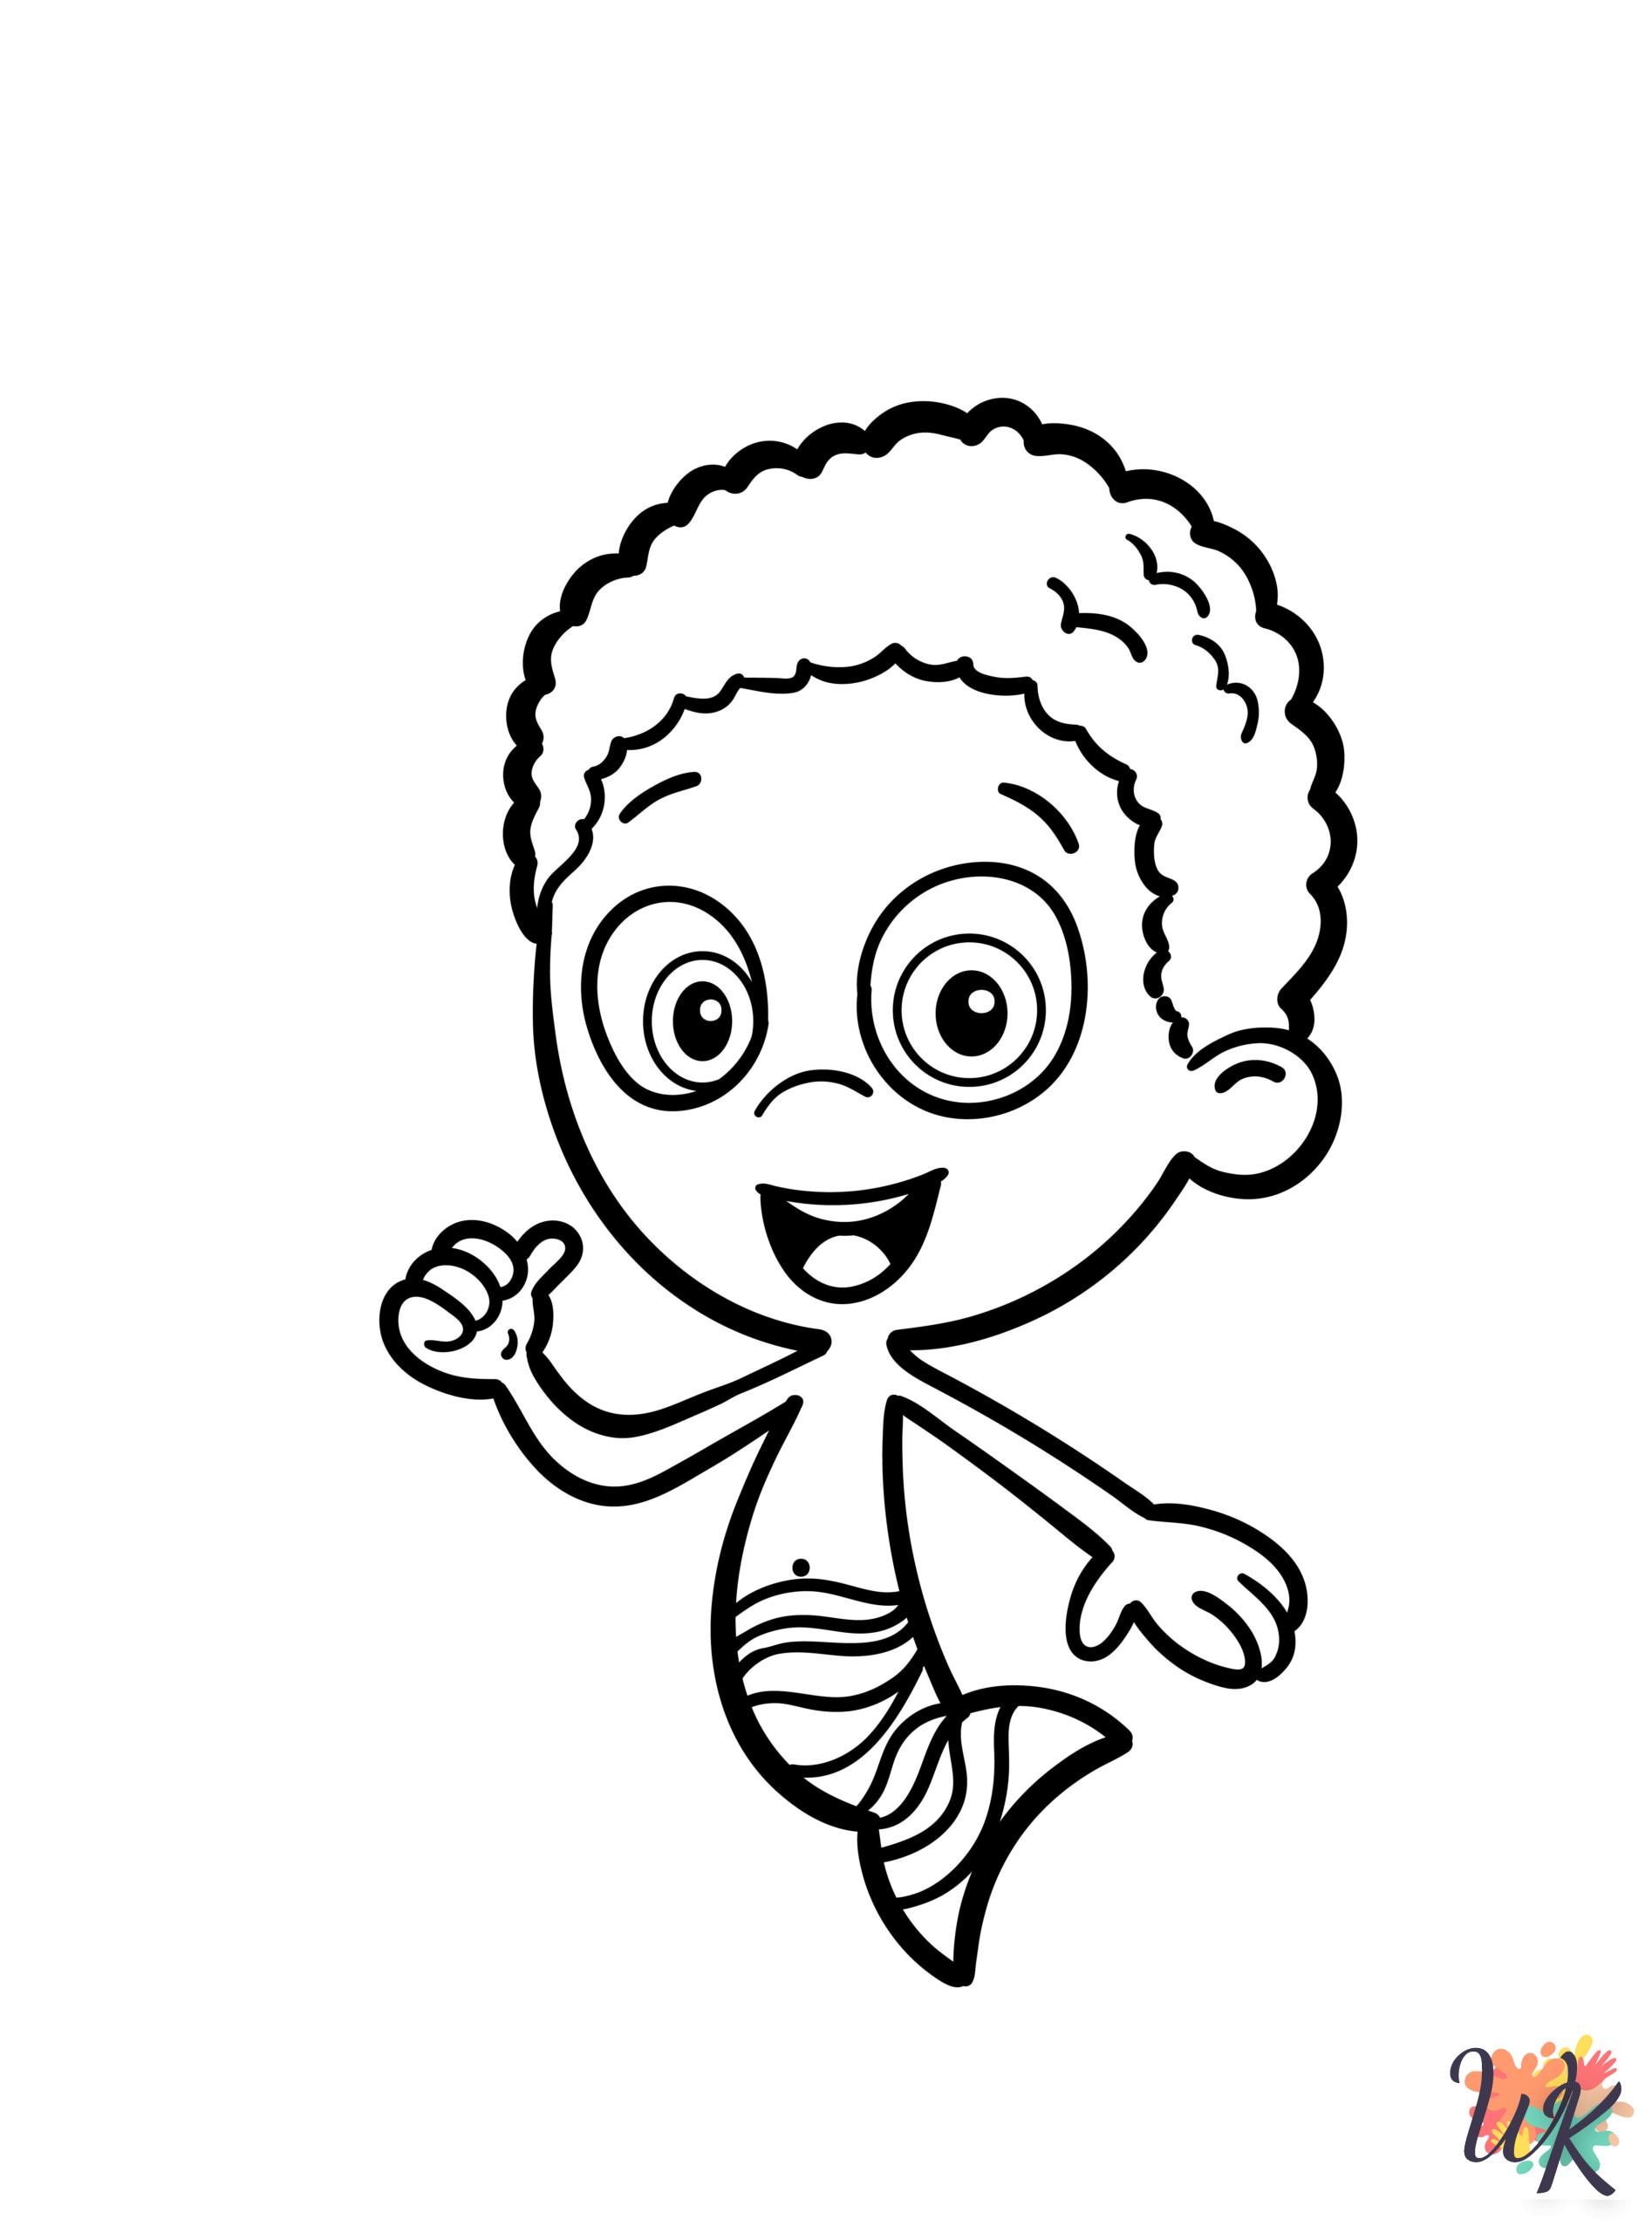 Bubble Guppies cards coloring pages